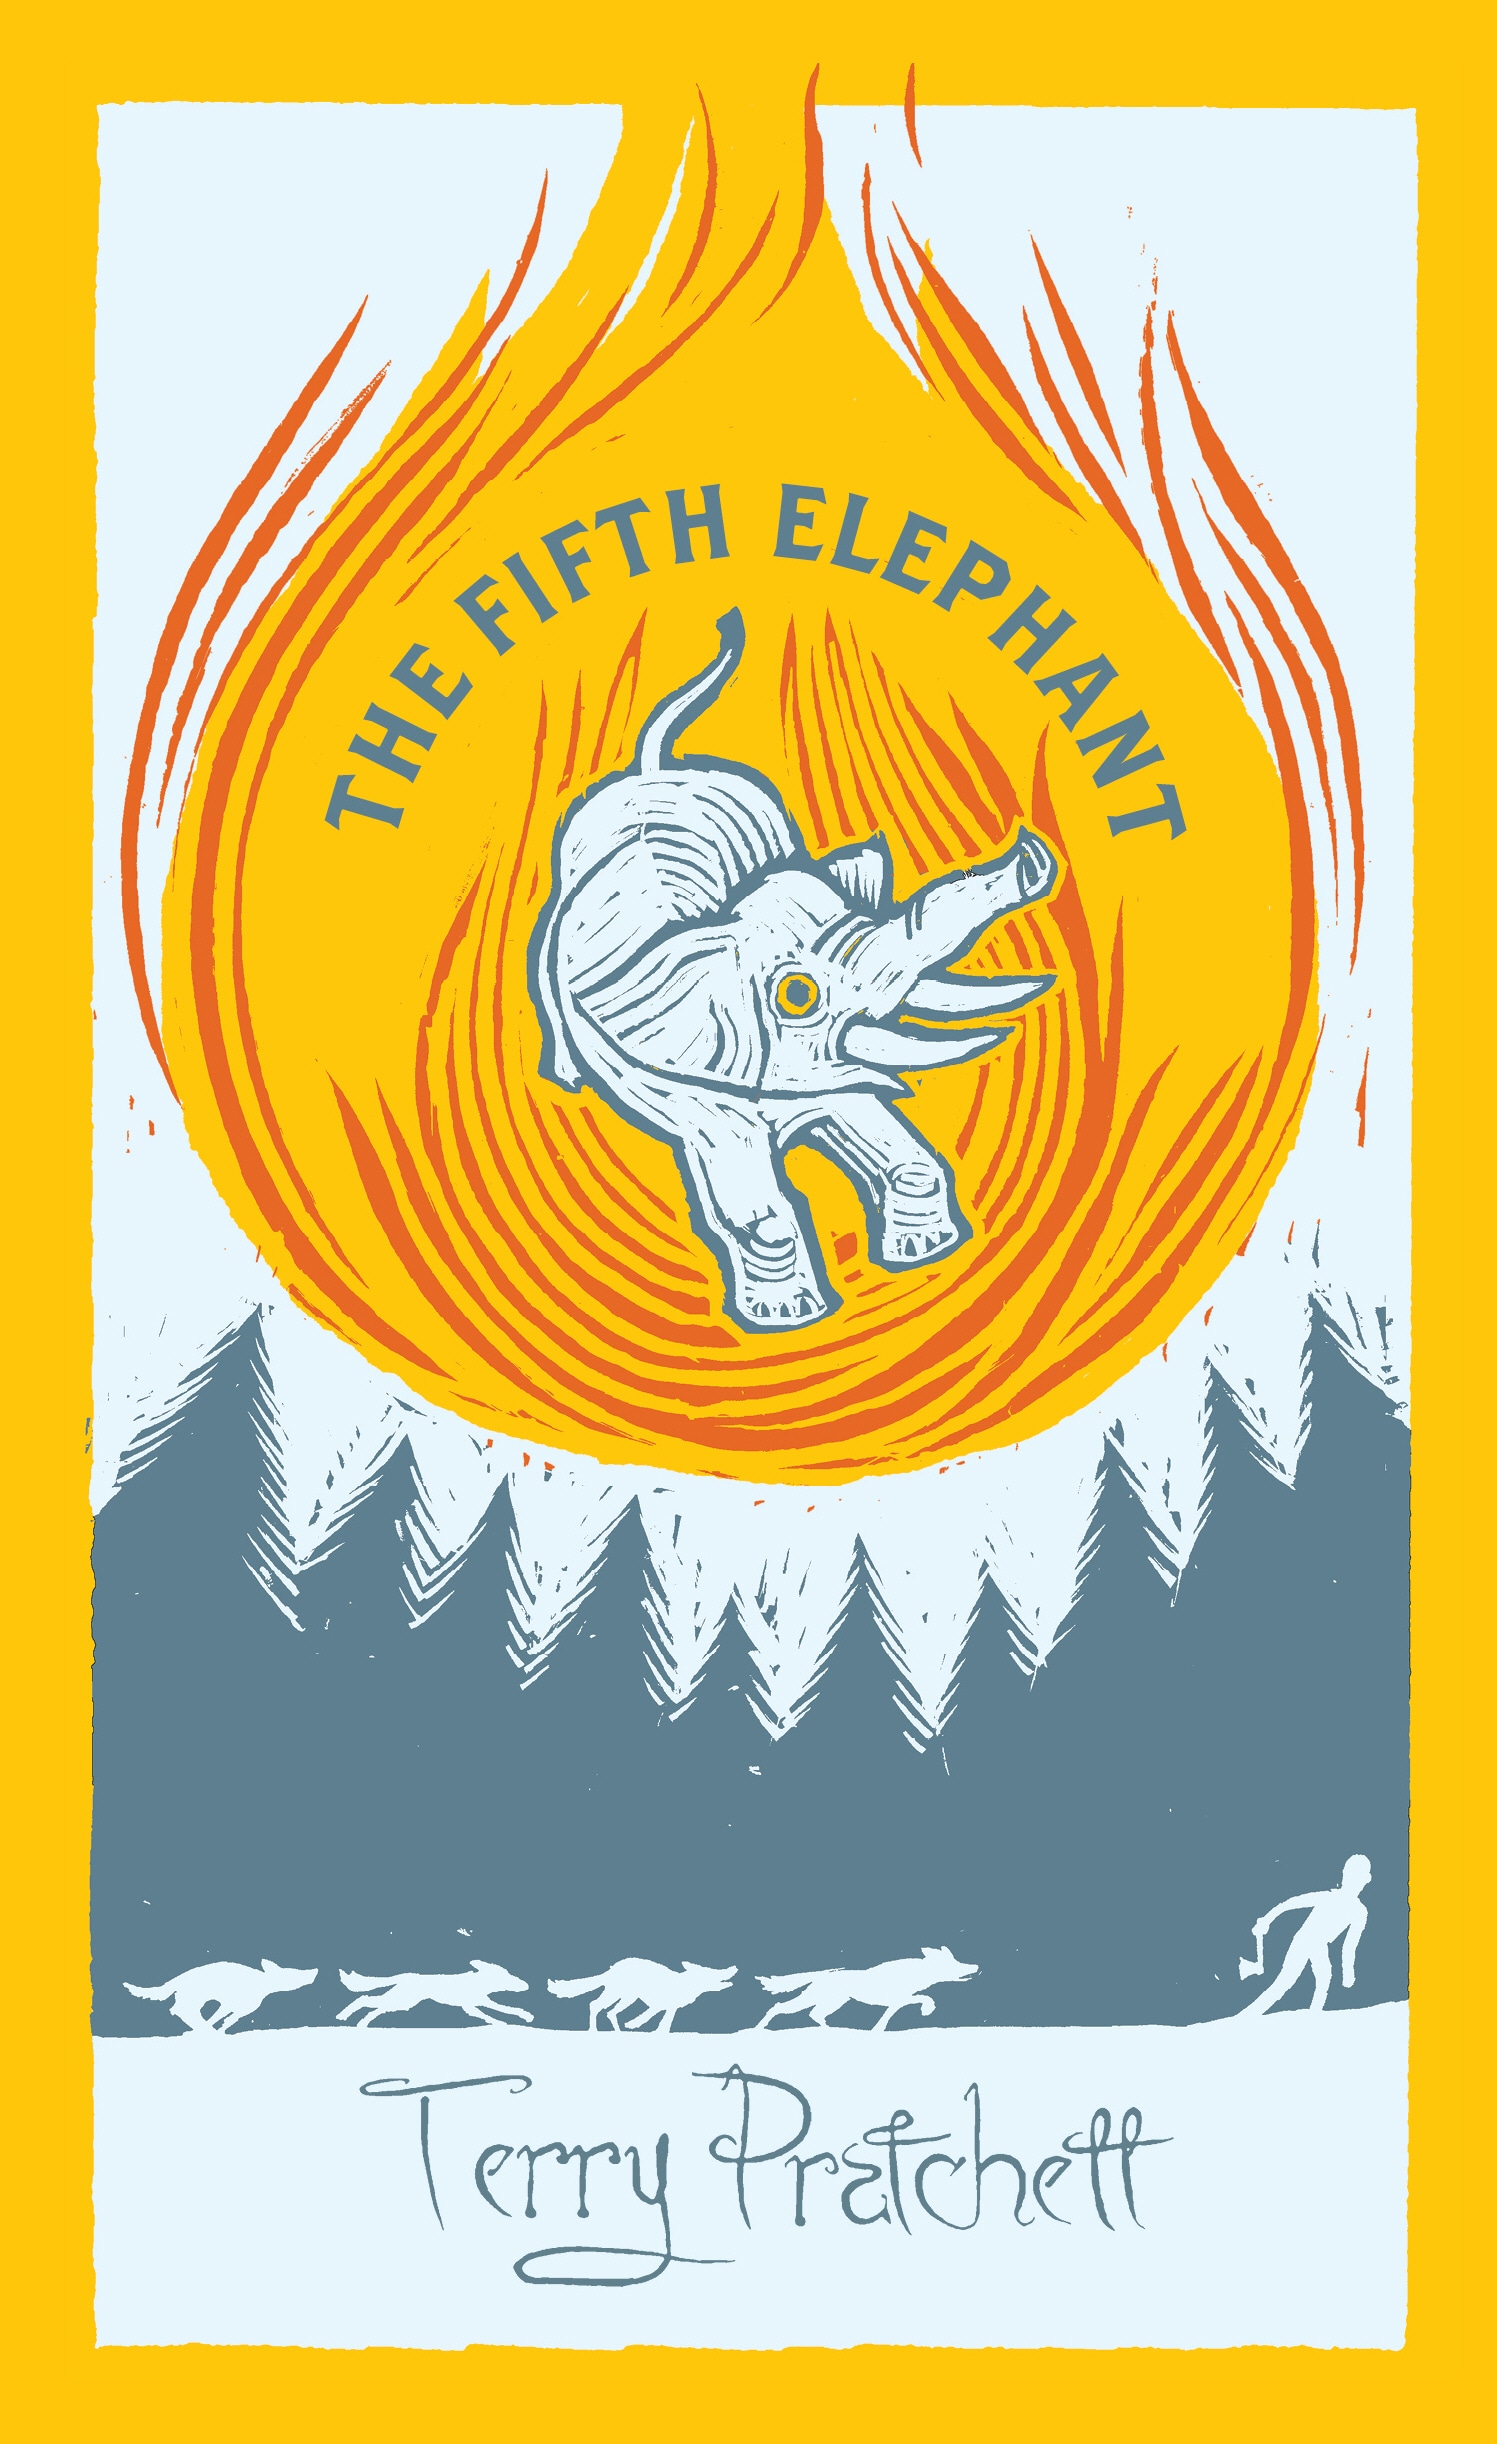 Book “The Fifth Elephant” by Terry Pratchett — October 20, 2016